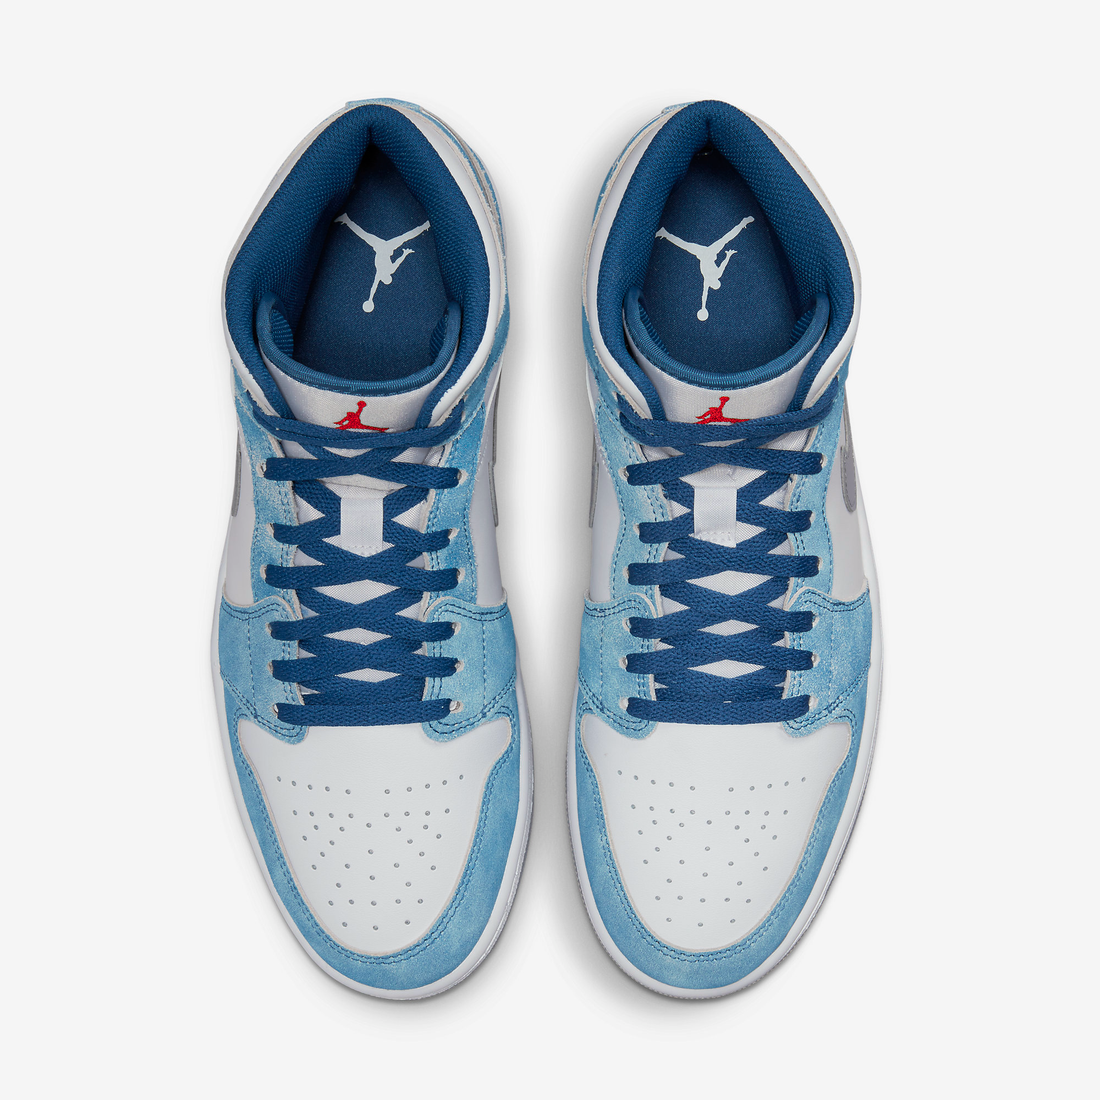 Nike Sneakers, Jordan 1 Mid ‘French Blue Fire Red’